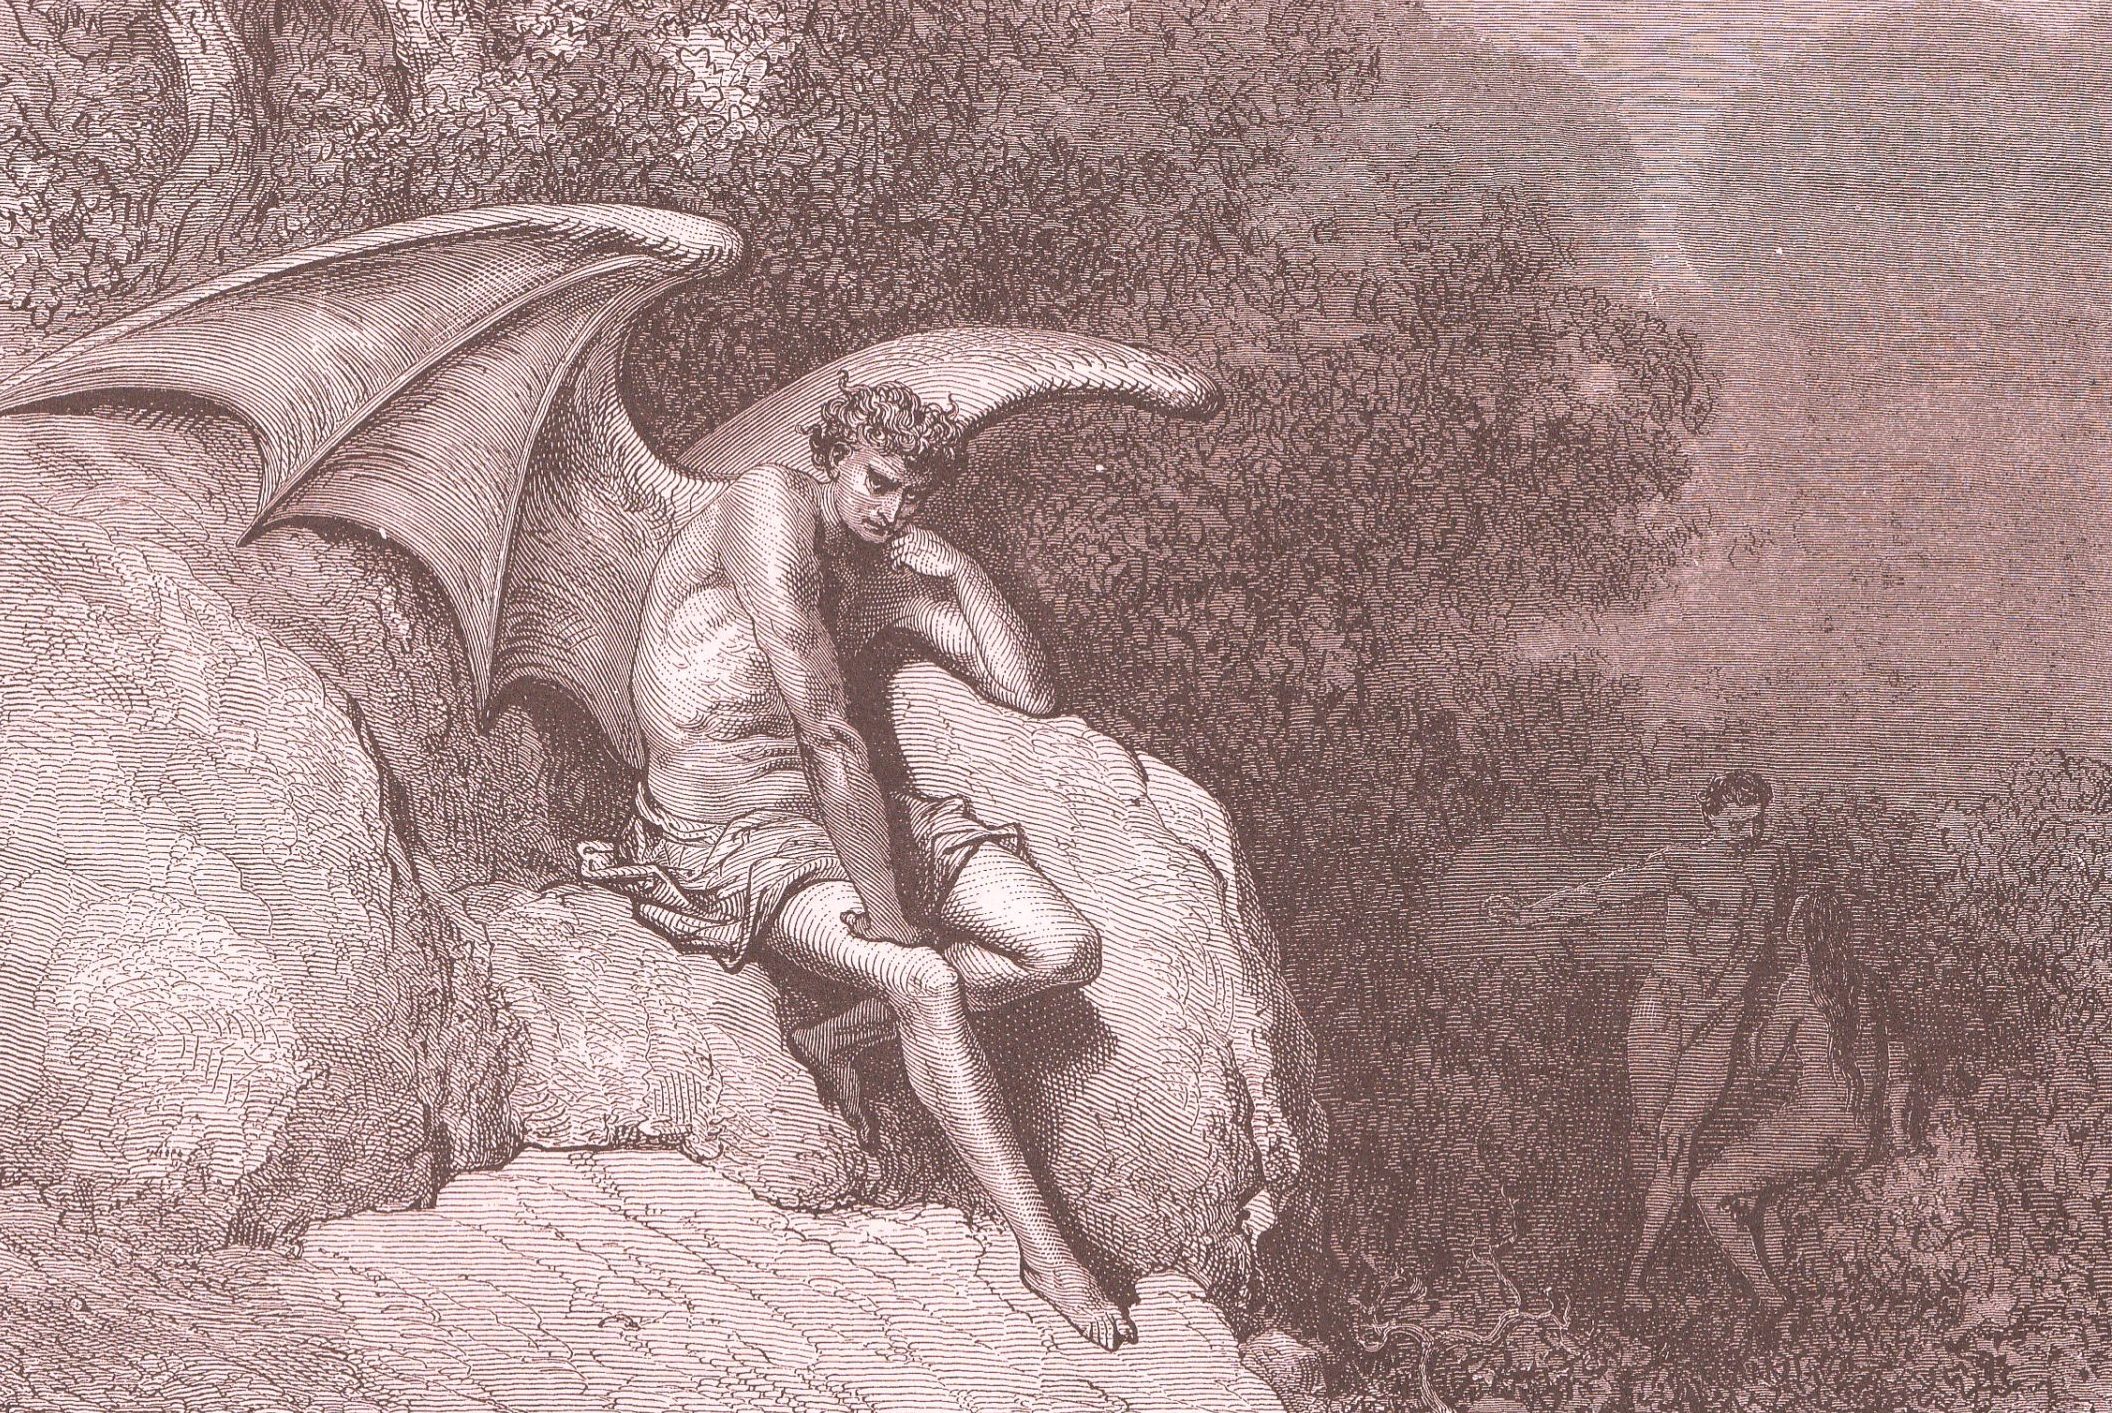 Paradise Lost: Satan is conquered by Doré